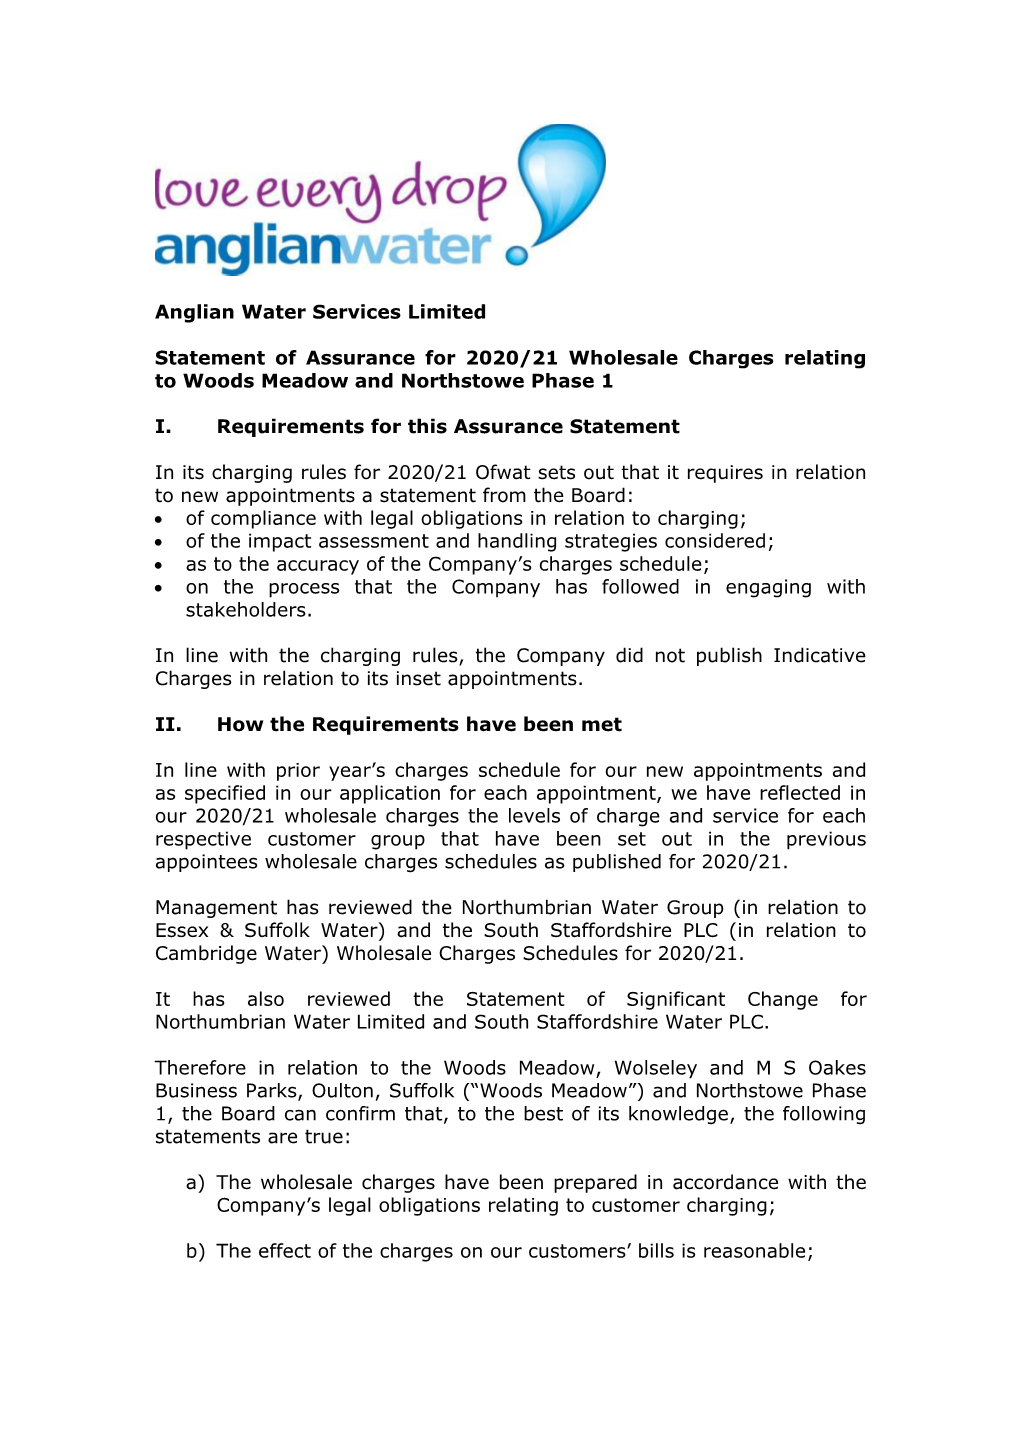 Anglian Water Services Limited Statement of Assurance for 2020/21 Wholesale Charges Relating to Woods Meadow and Northstowe Phas